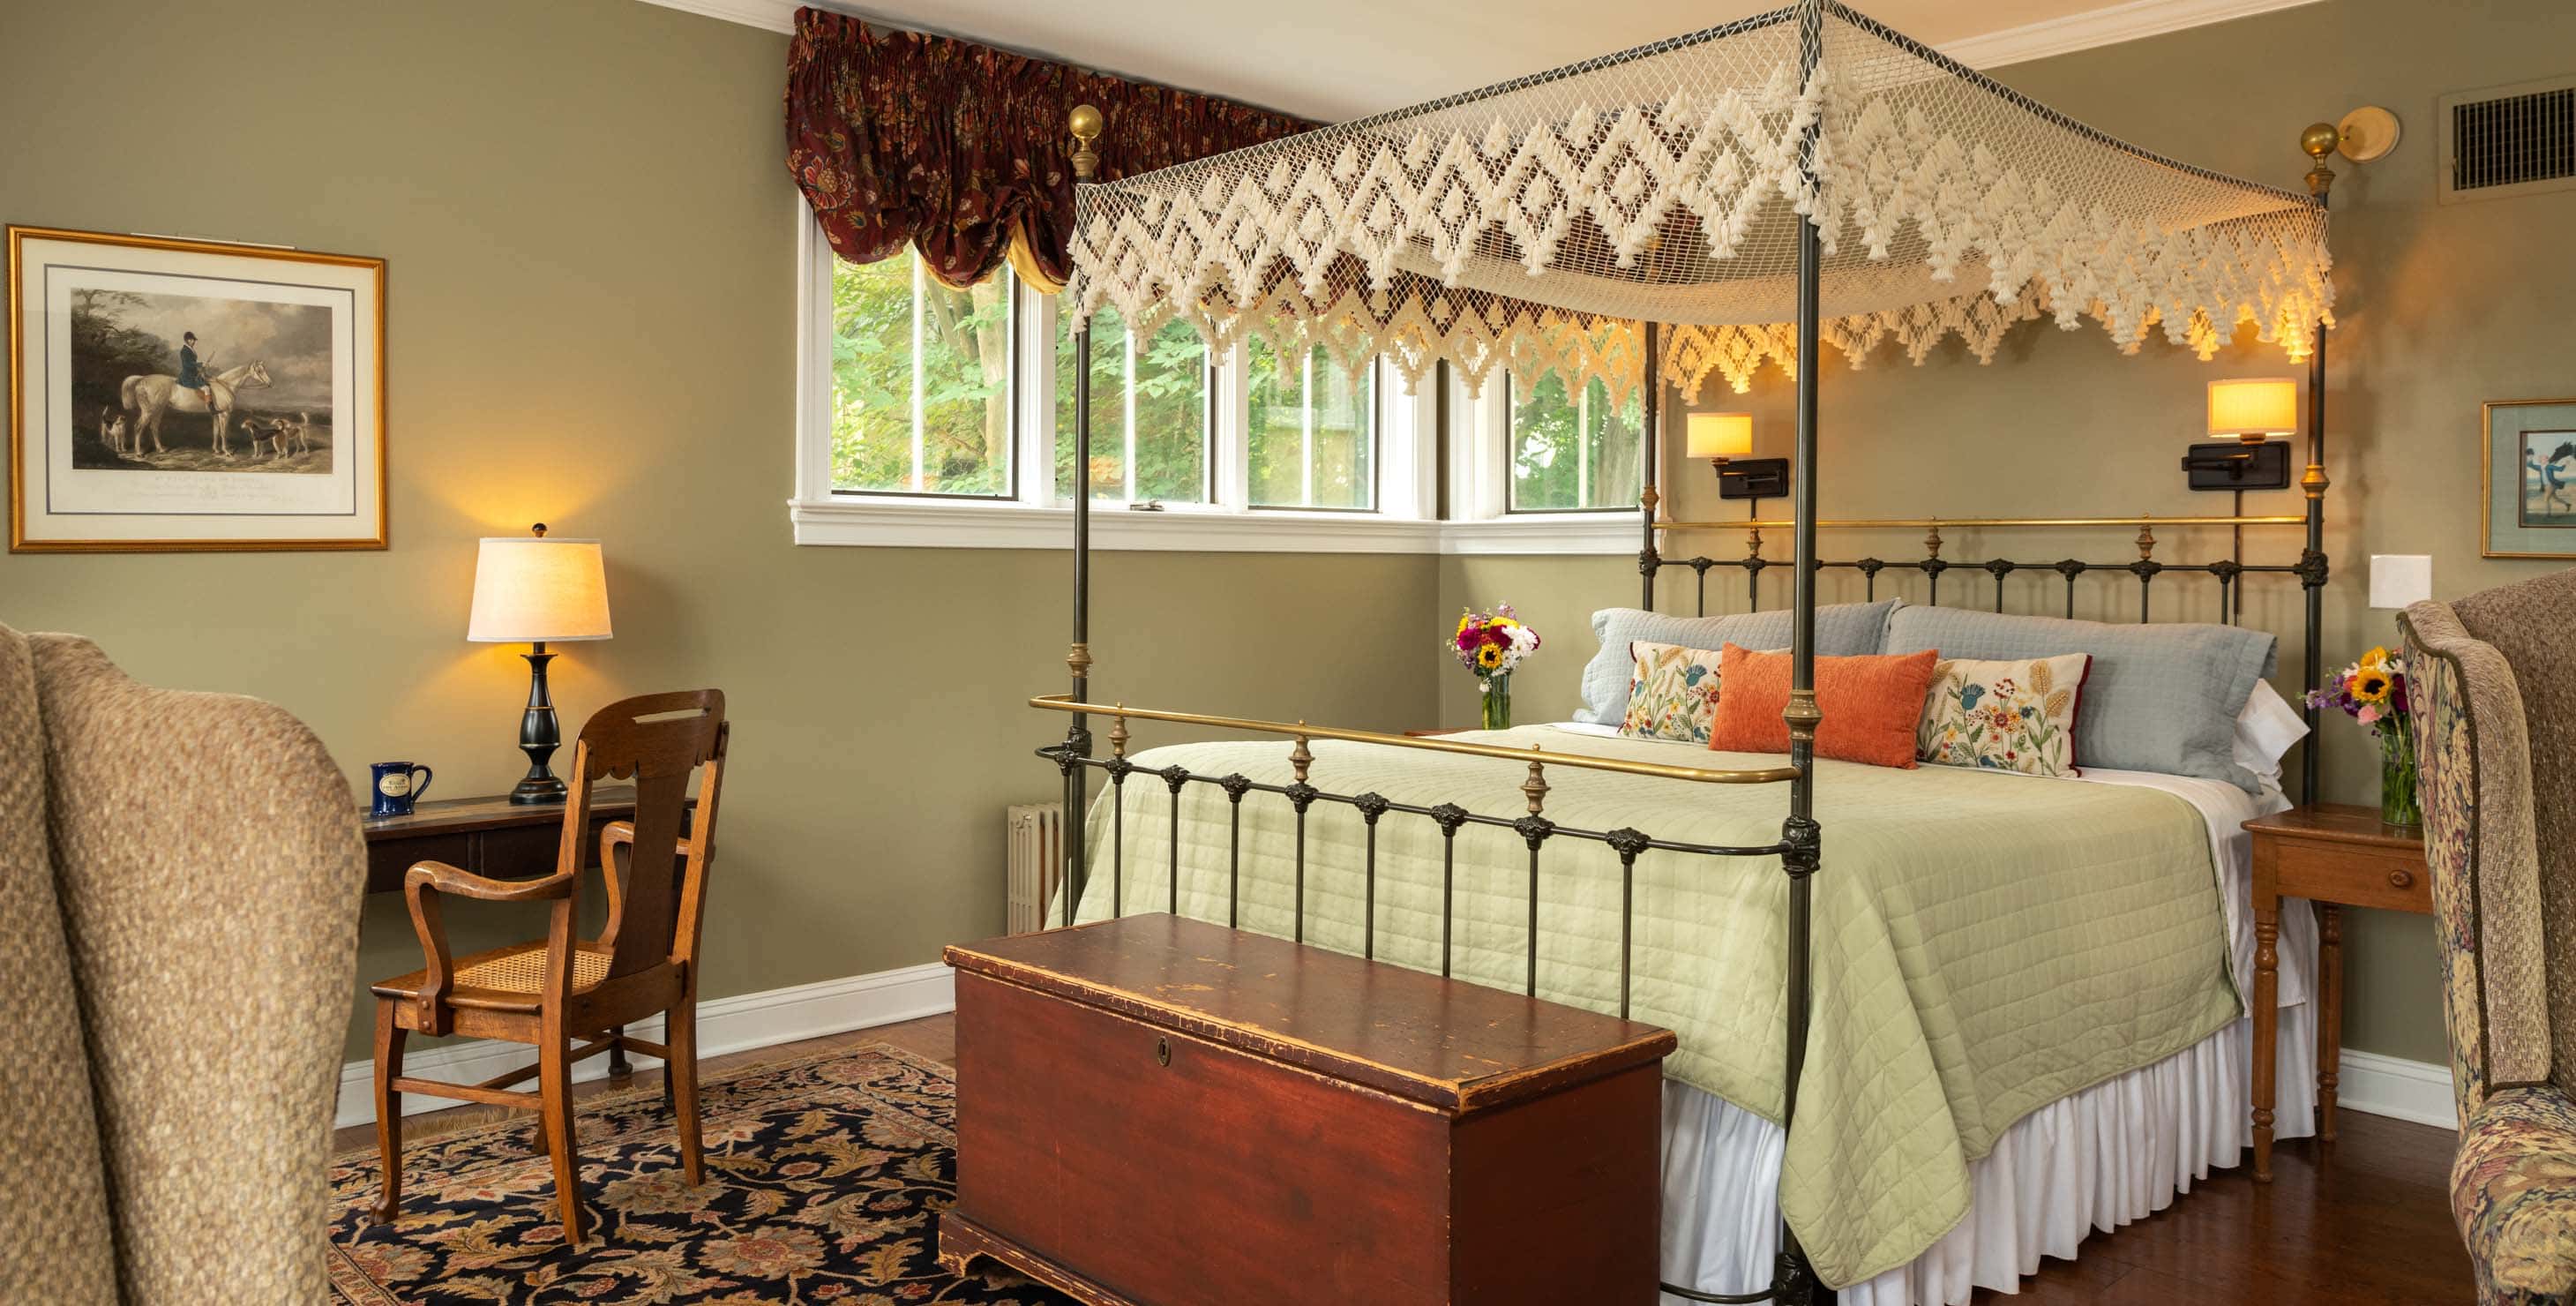 Wrought iron king bed with a trunk at the foot of the bed in a spacious room